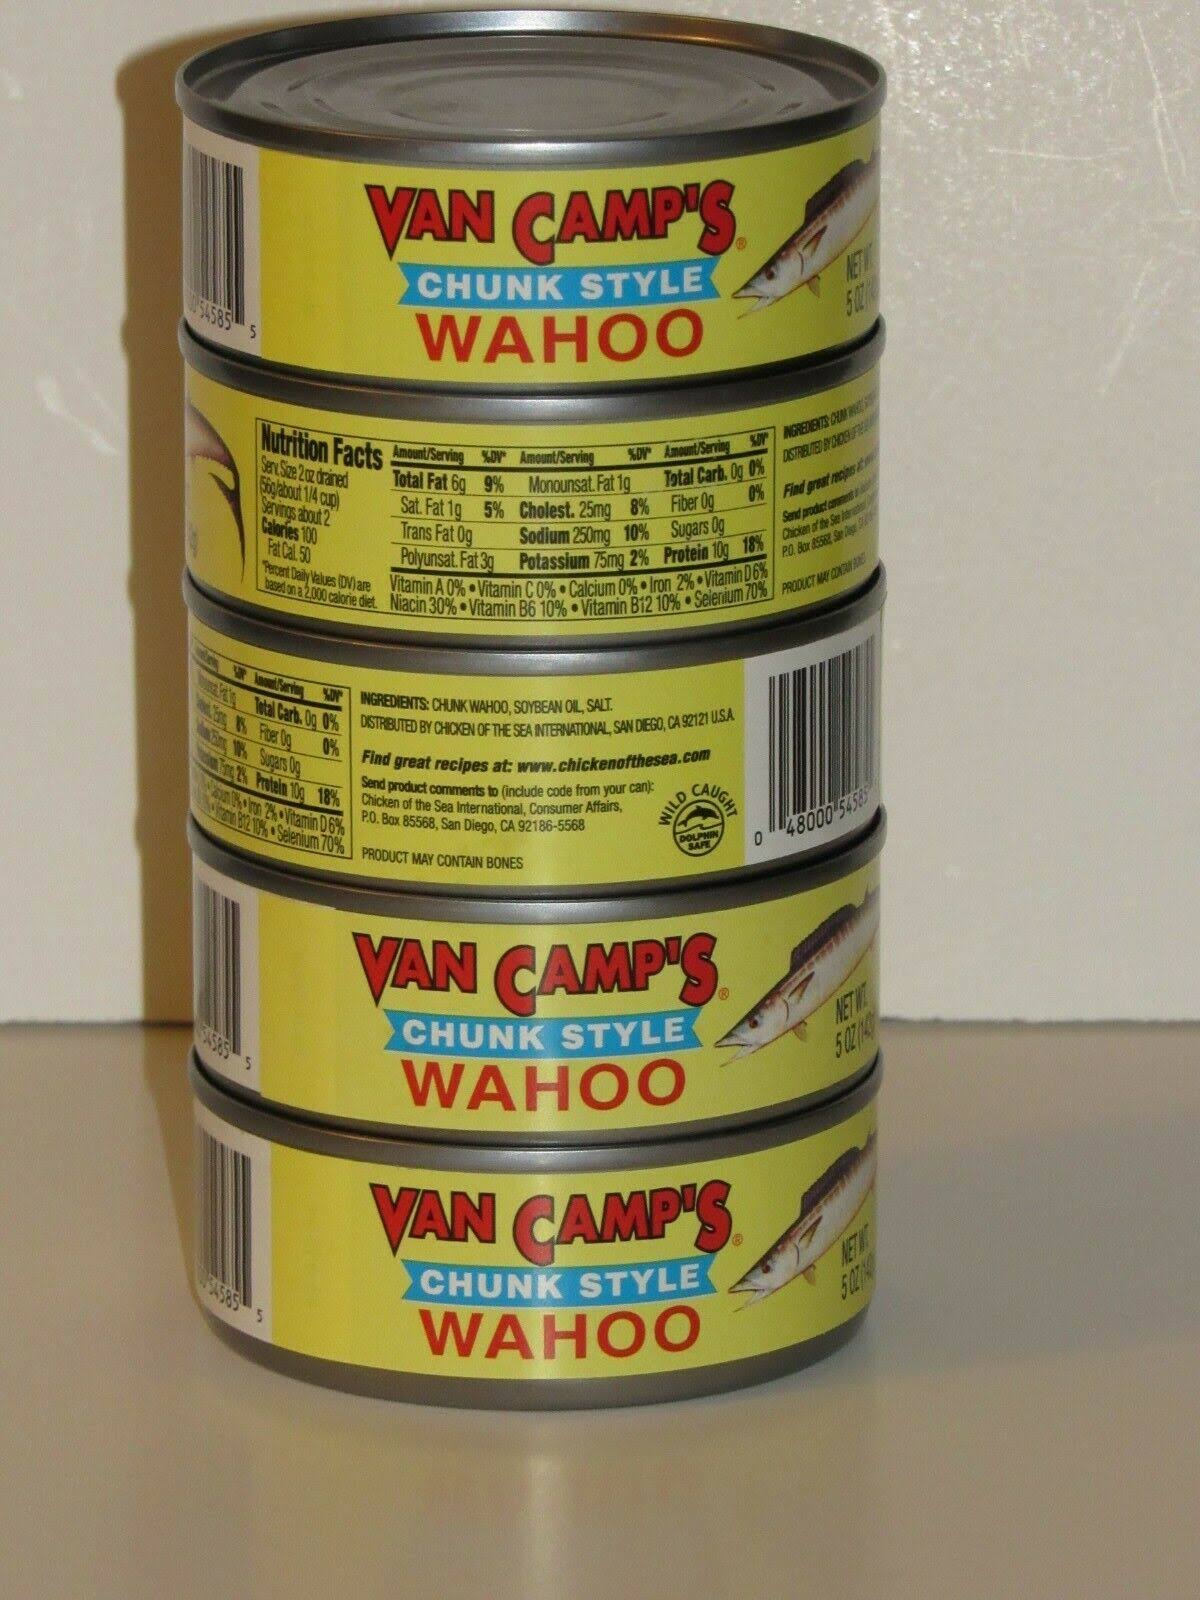 Van Camp's Wahoo Chunk Style Ono Canned Fish - 24 Cans